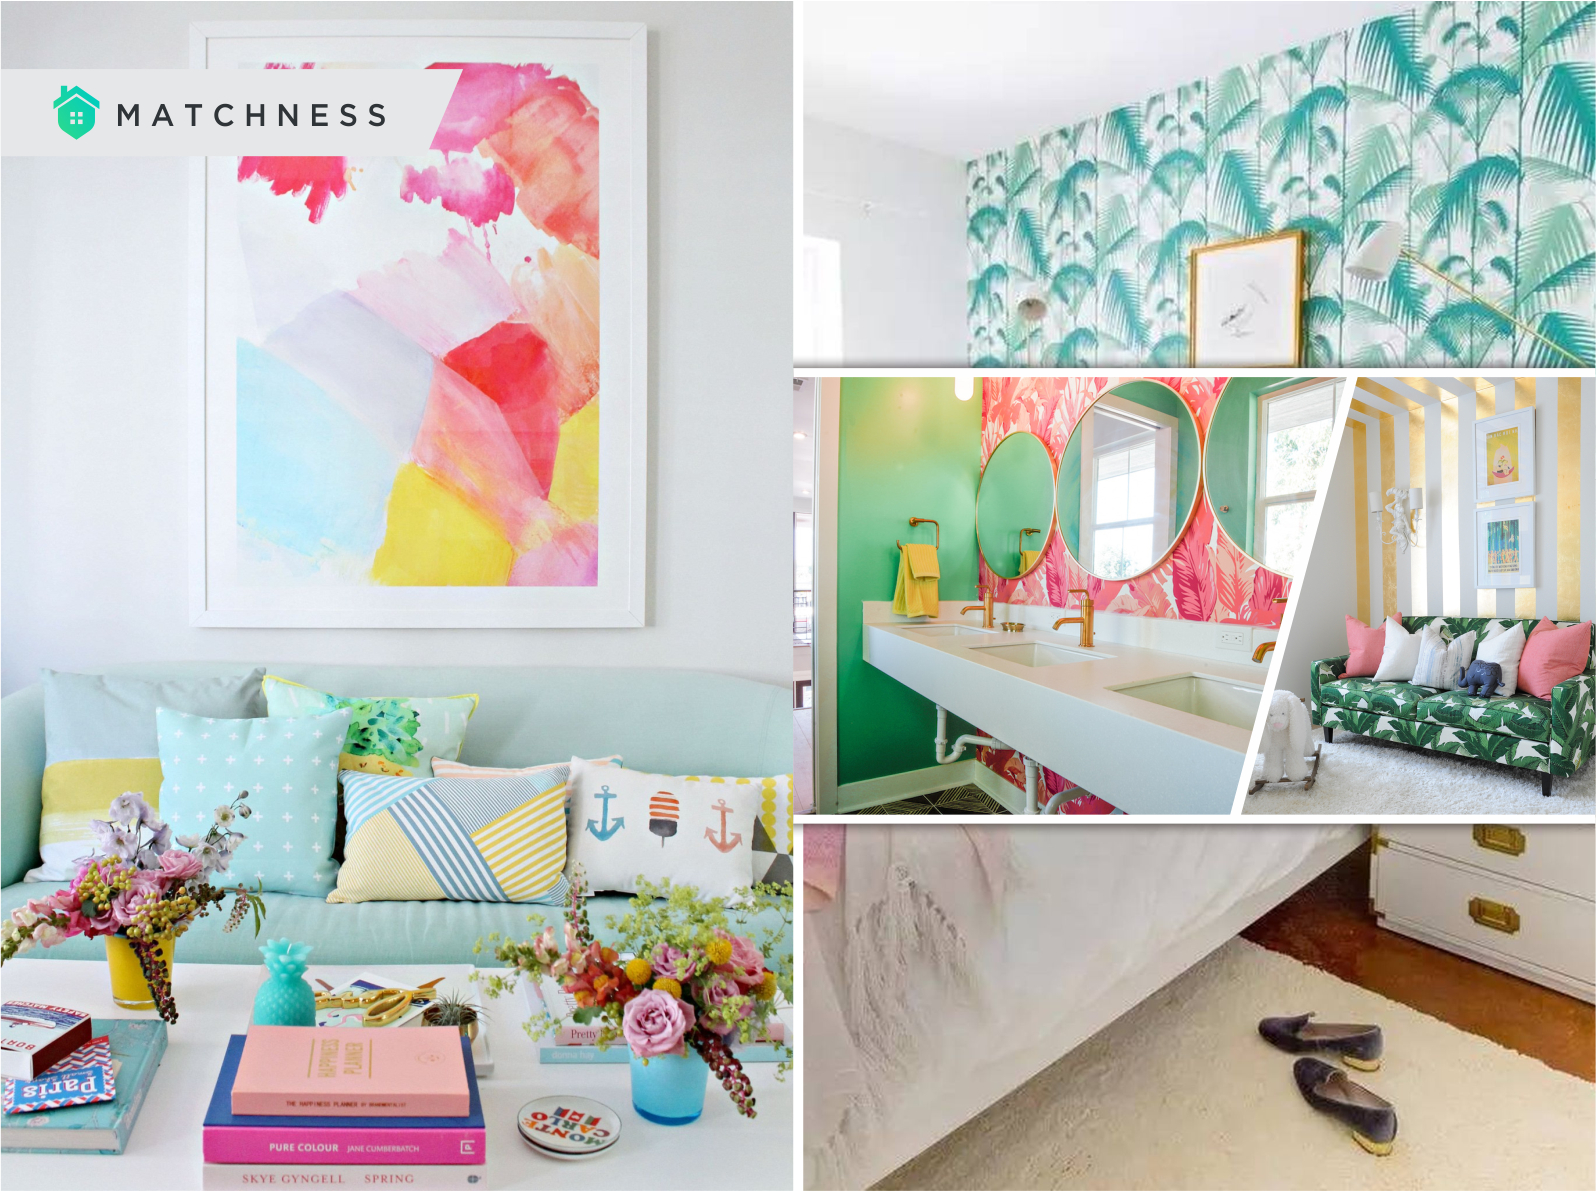 Serving The Ultimate Staycation With These Tropical Room Design Ideas